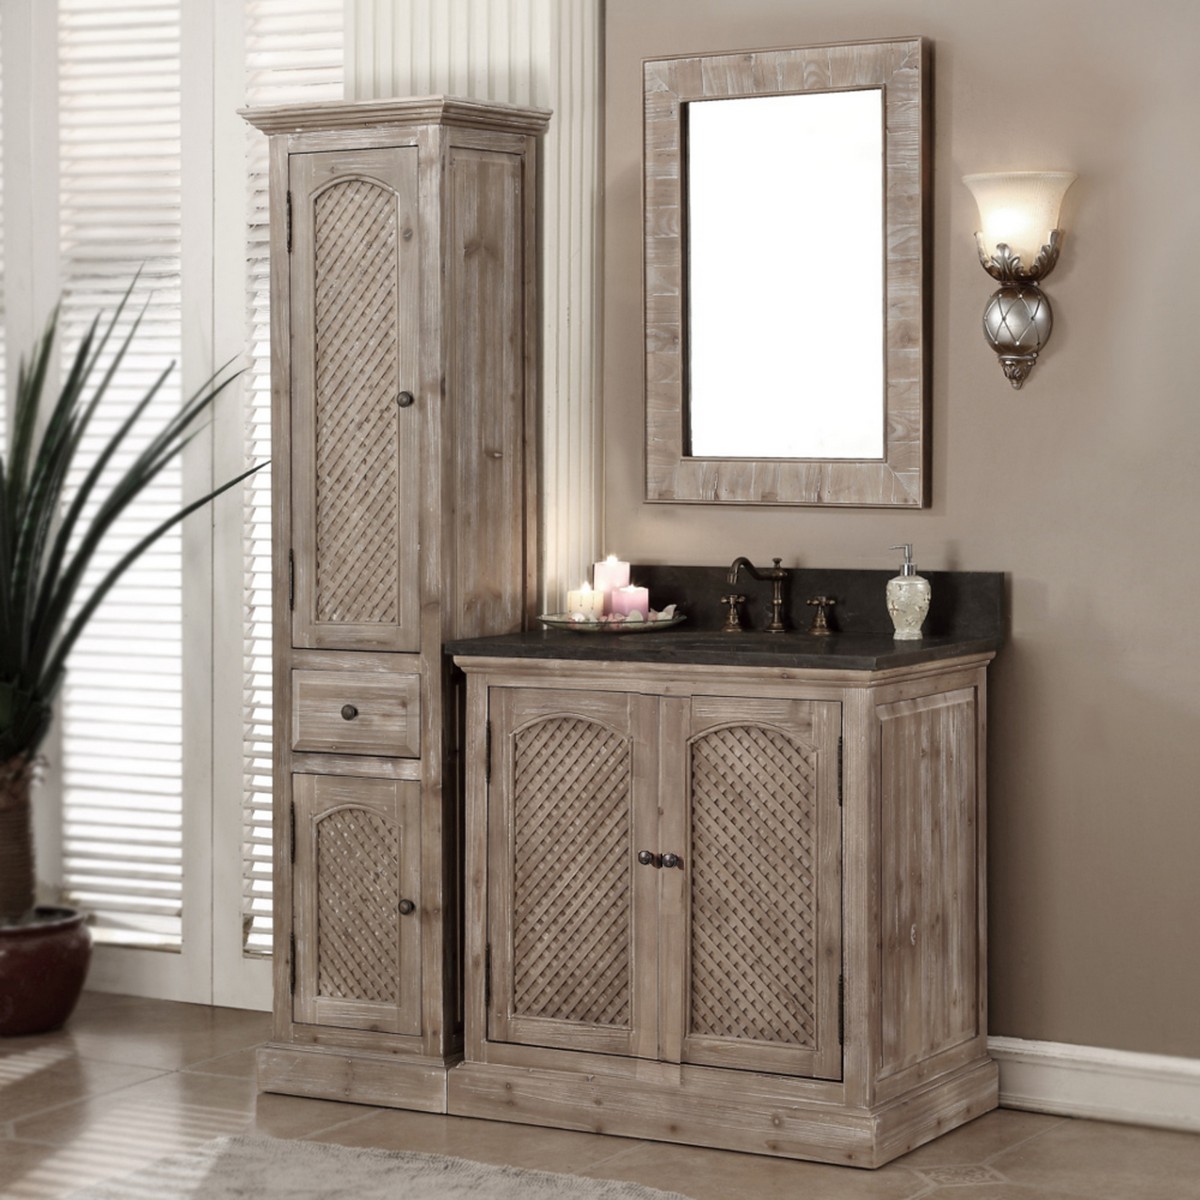 INFURNITURE WK8136+WK TOP 36 INCH SOLID RECYCLED FIR SINK VANITY WITH LIMESTONE TOP